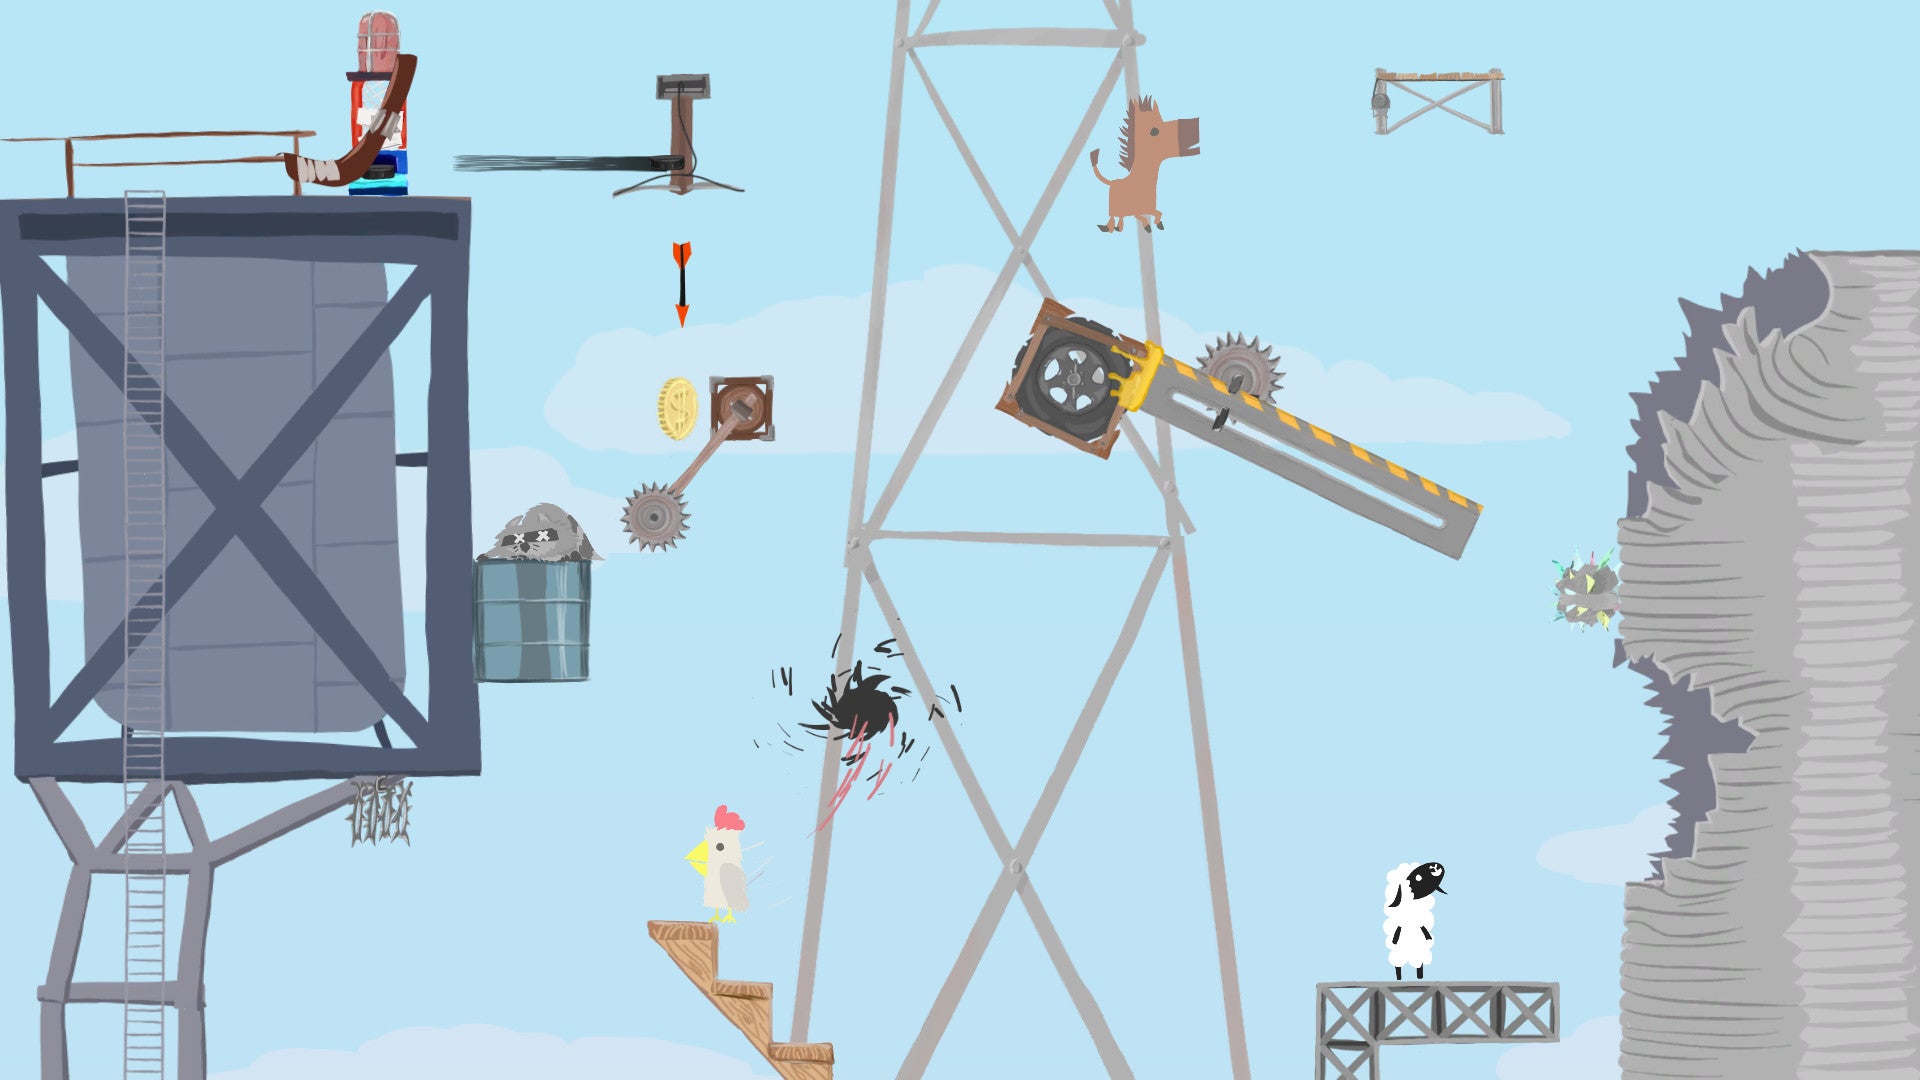 A deadly level in an Ultimate Chicken Horse screenshot.